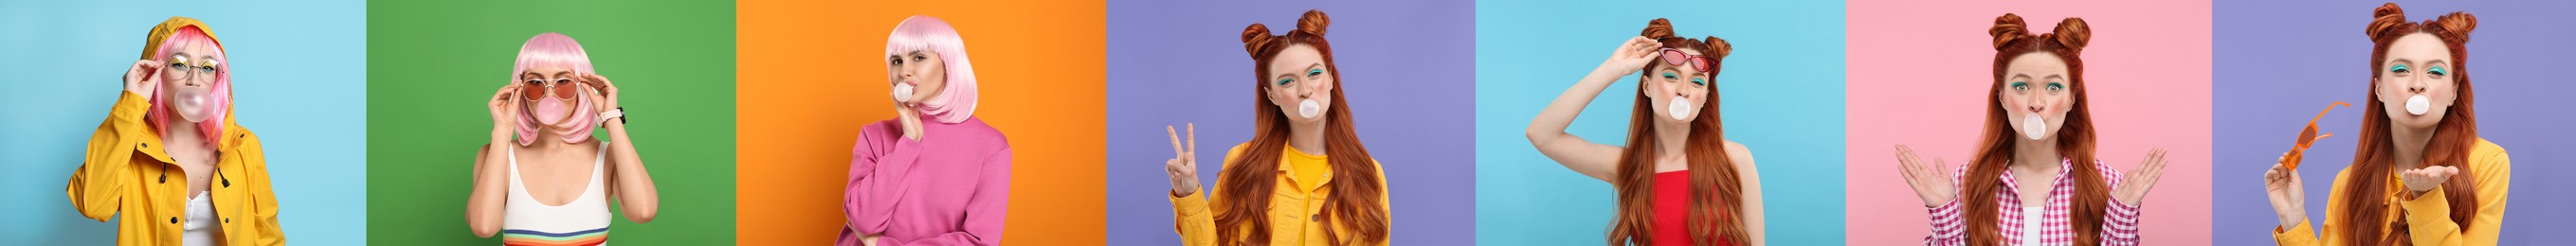 Image of Women blowing bubble gums on color backgrounds, set of photos